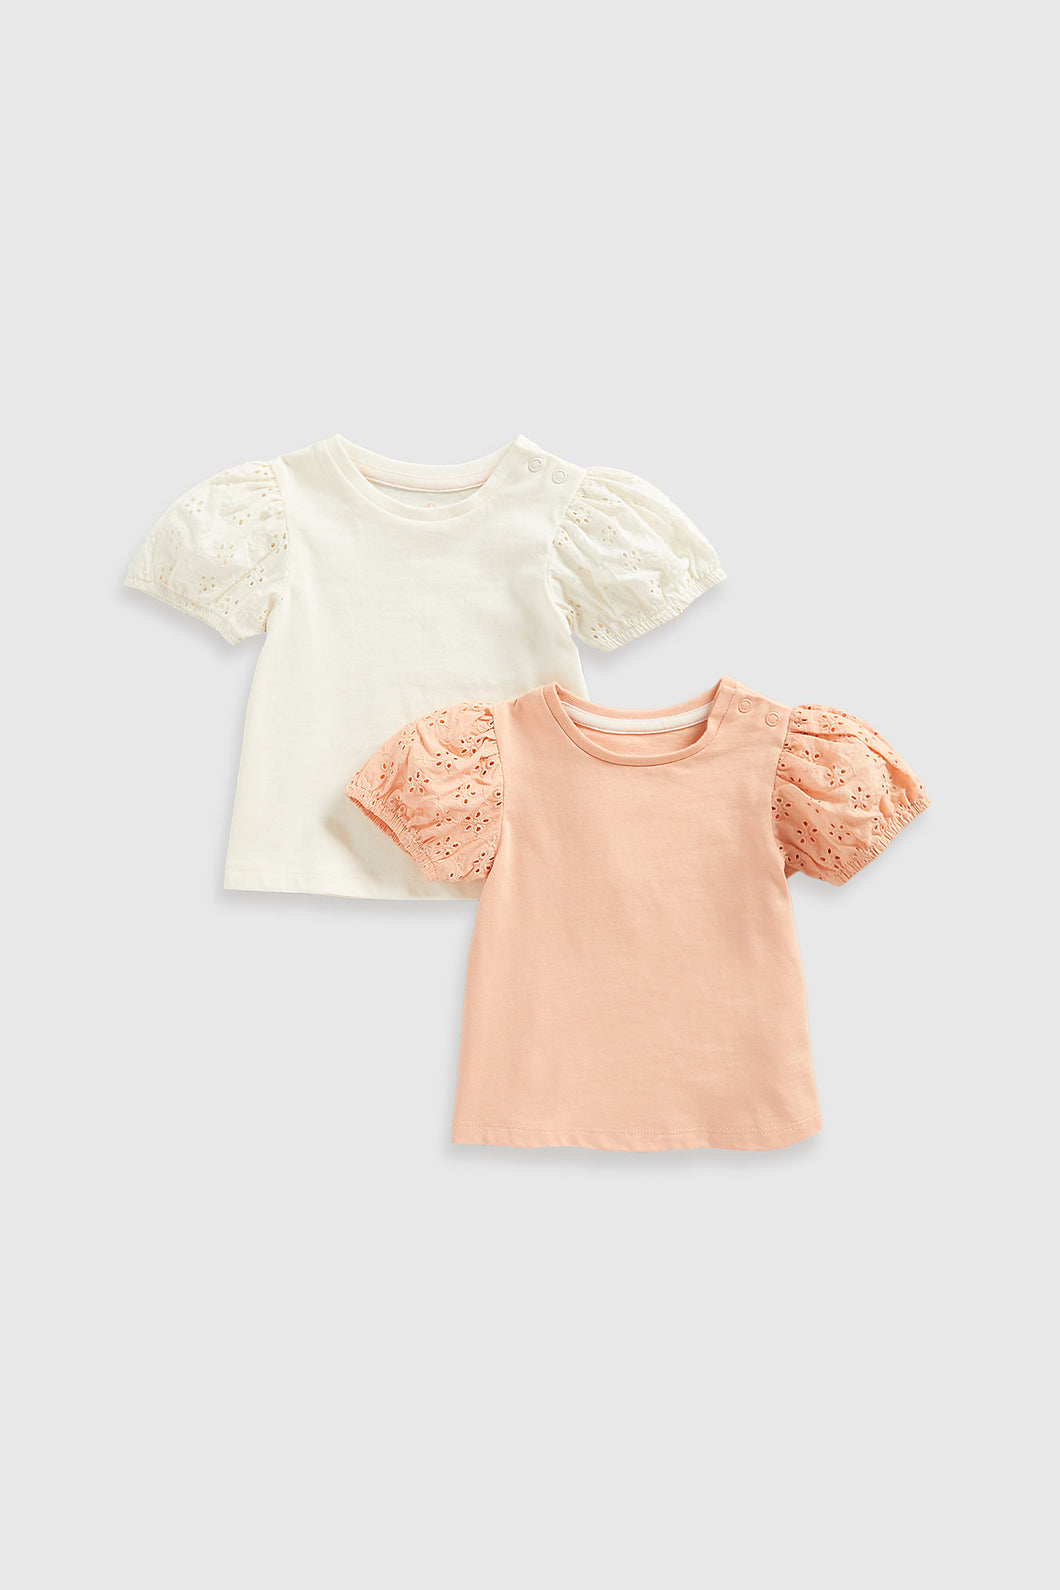 Mothercare Broderie Sleeve T-Shirts - 2 Pack